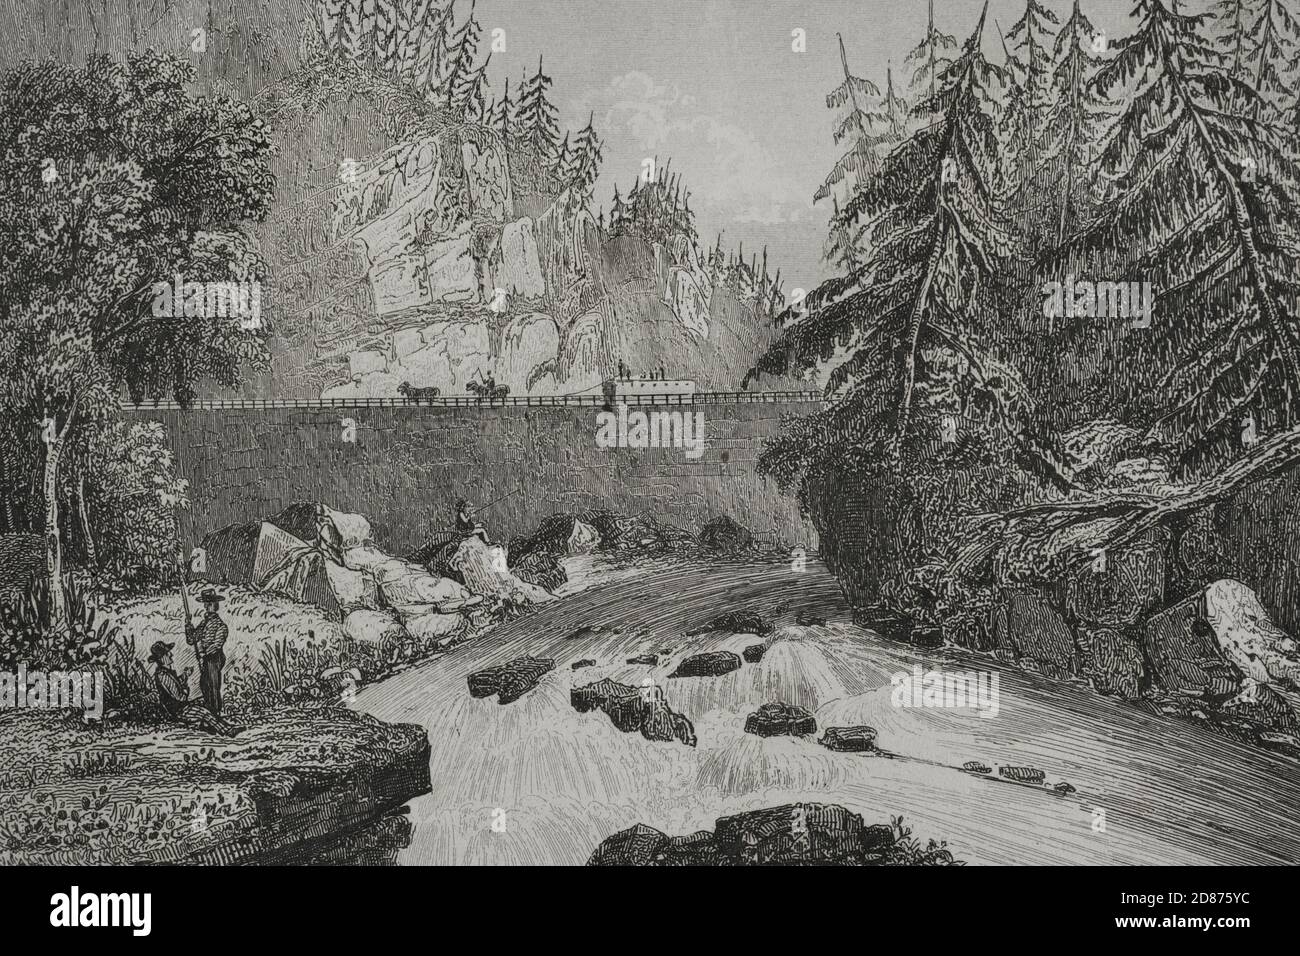 United States, New York State. Little Falls. Mohawk River valley rapids and rocks. A canal was constructed around the rapids about 1795. Engraving by Milbert. Panorama Universal. History of the United States of America, from 1st edition of Jean B.G. Roux de Rochelle's Etats-Unis d'Amérique in 1837. Spanish edition, printed in Barcelona, 1850. Stock Photo